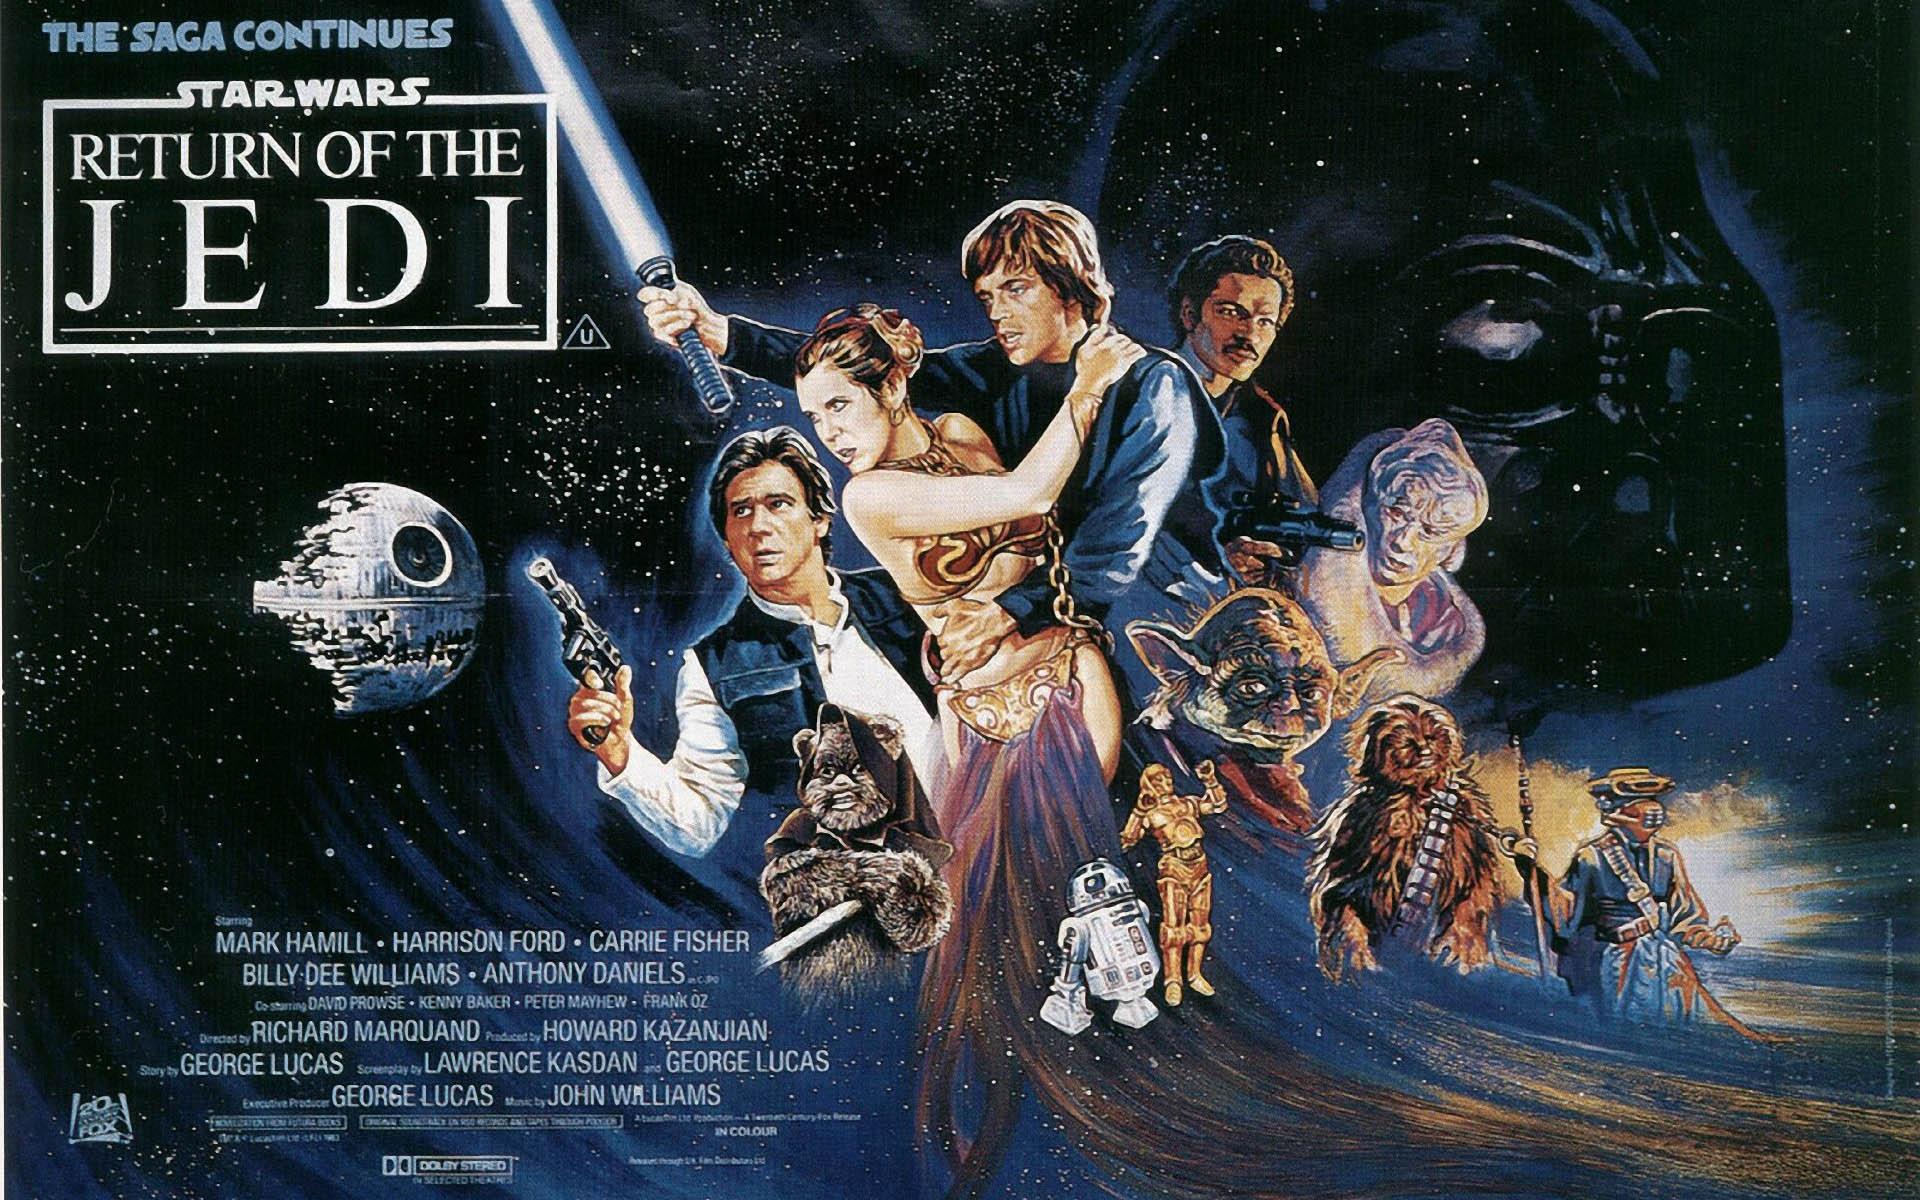 Star Wars wallpaper from the classic movies